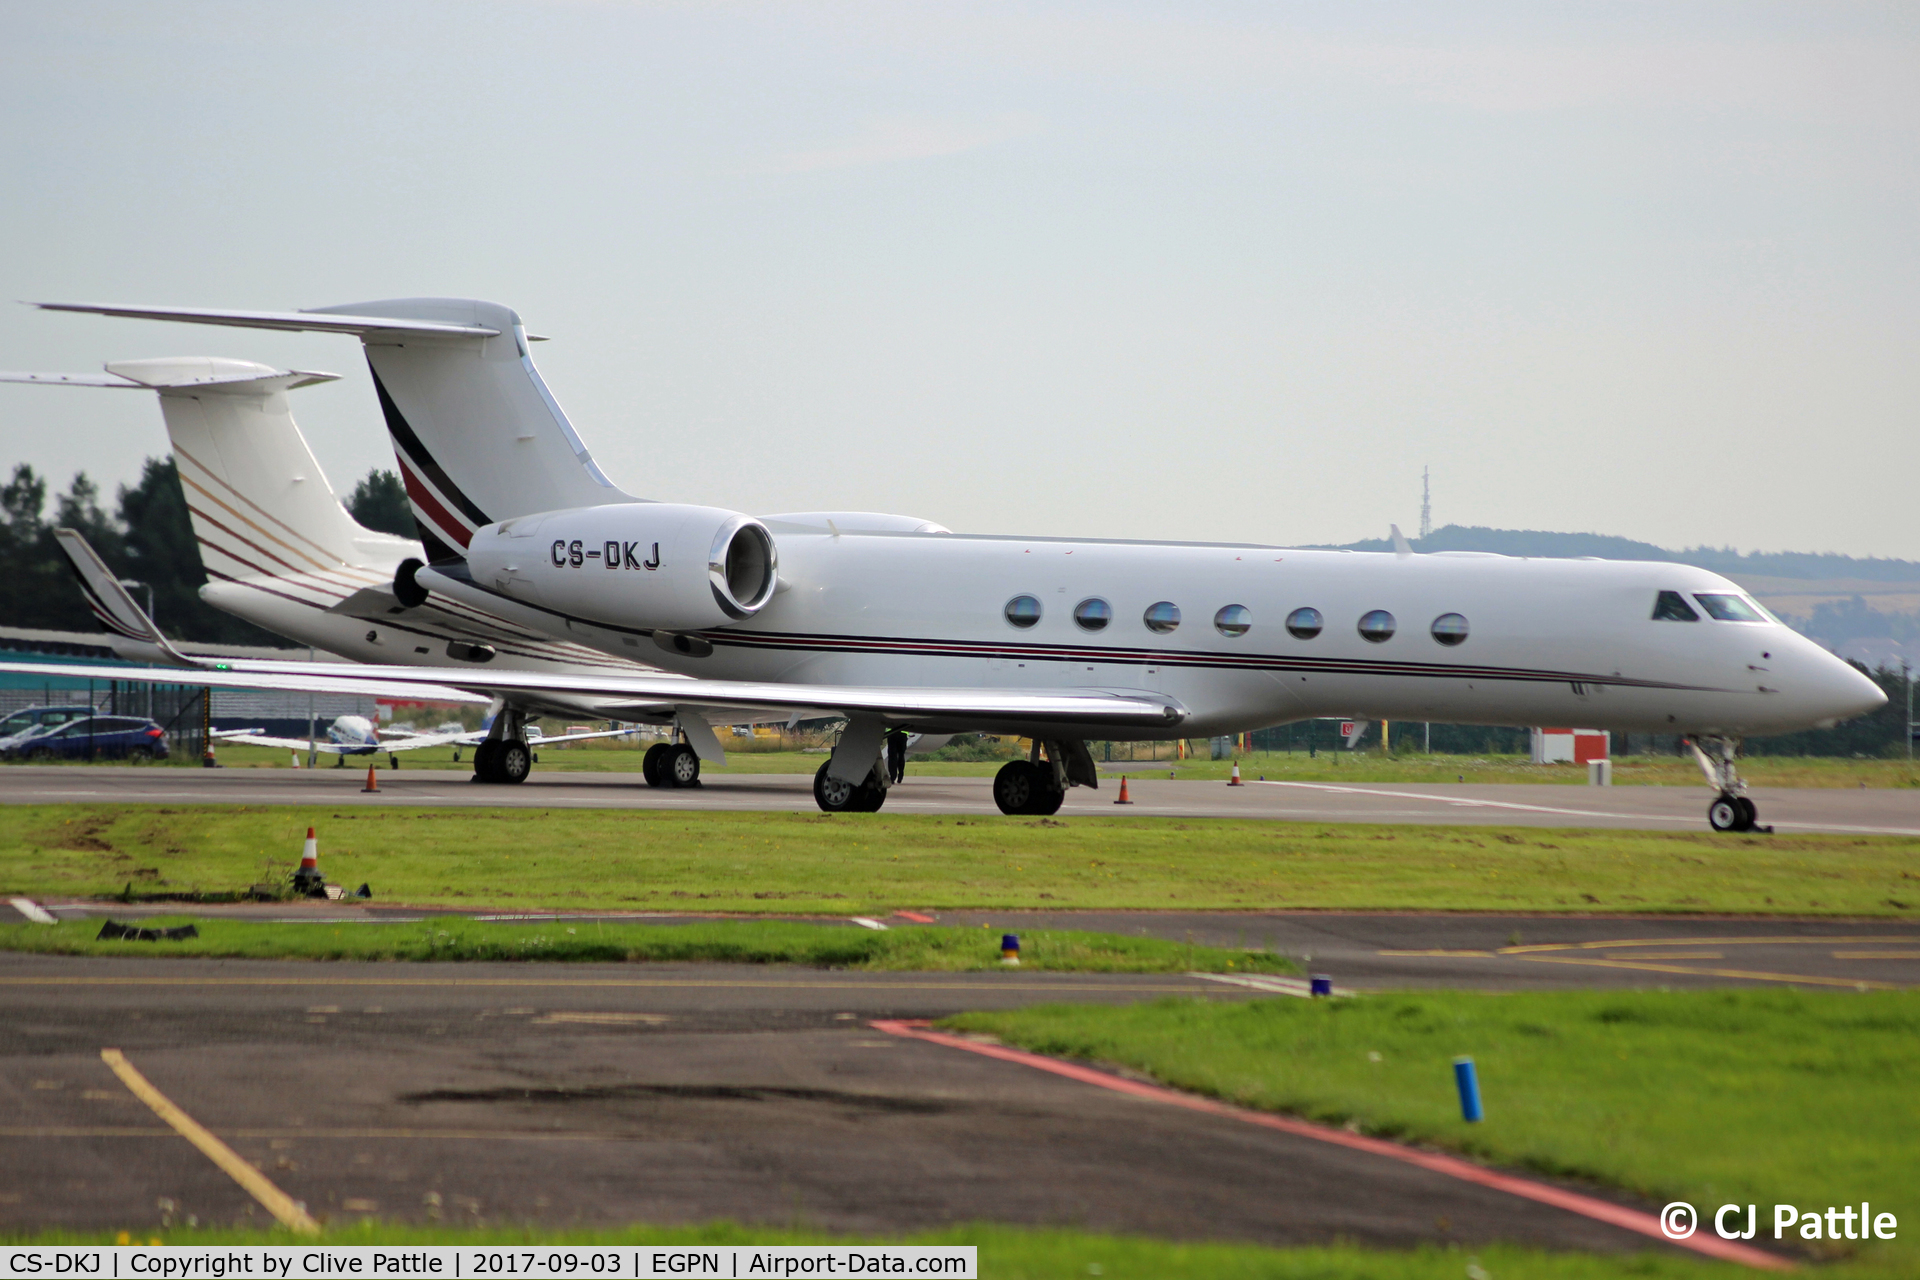 CS-DKJ, 2008 Gulfstream Aerospace V-SP G550 C/N 5174, On the apron at Dundee